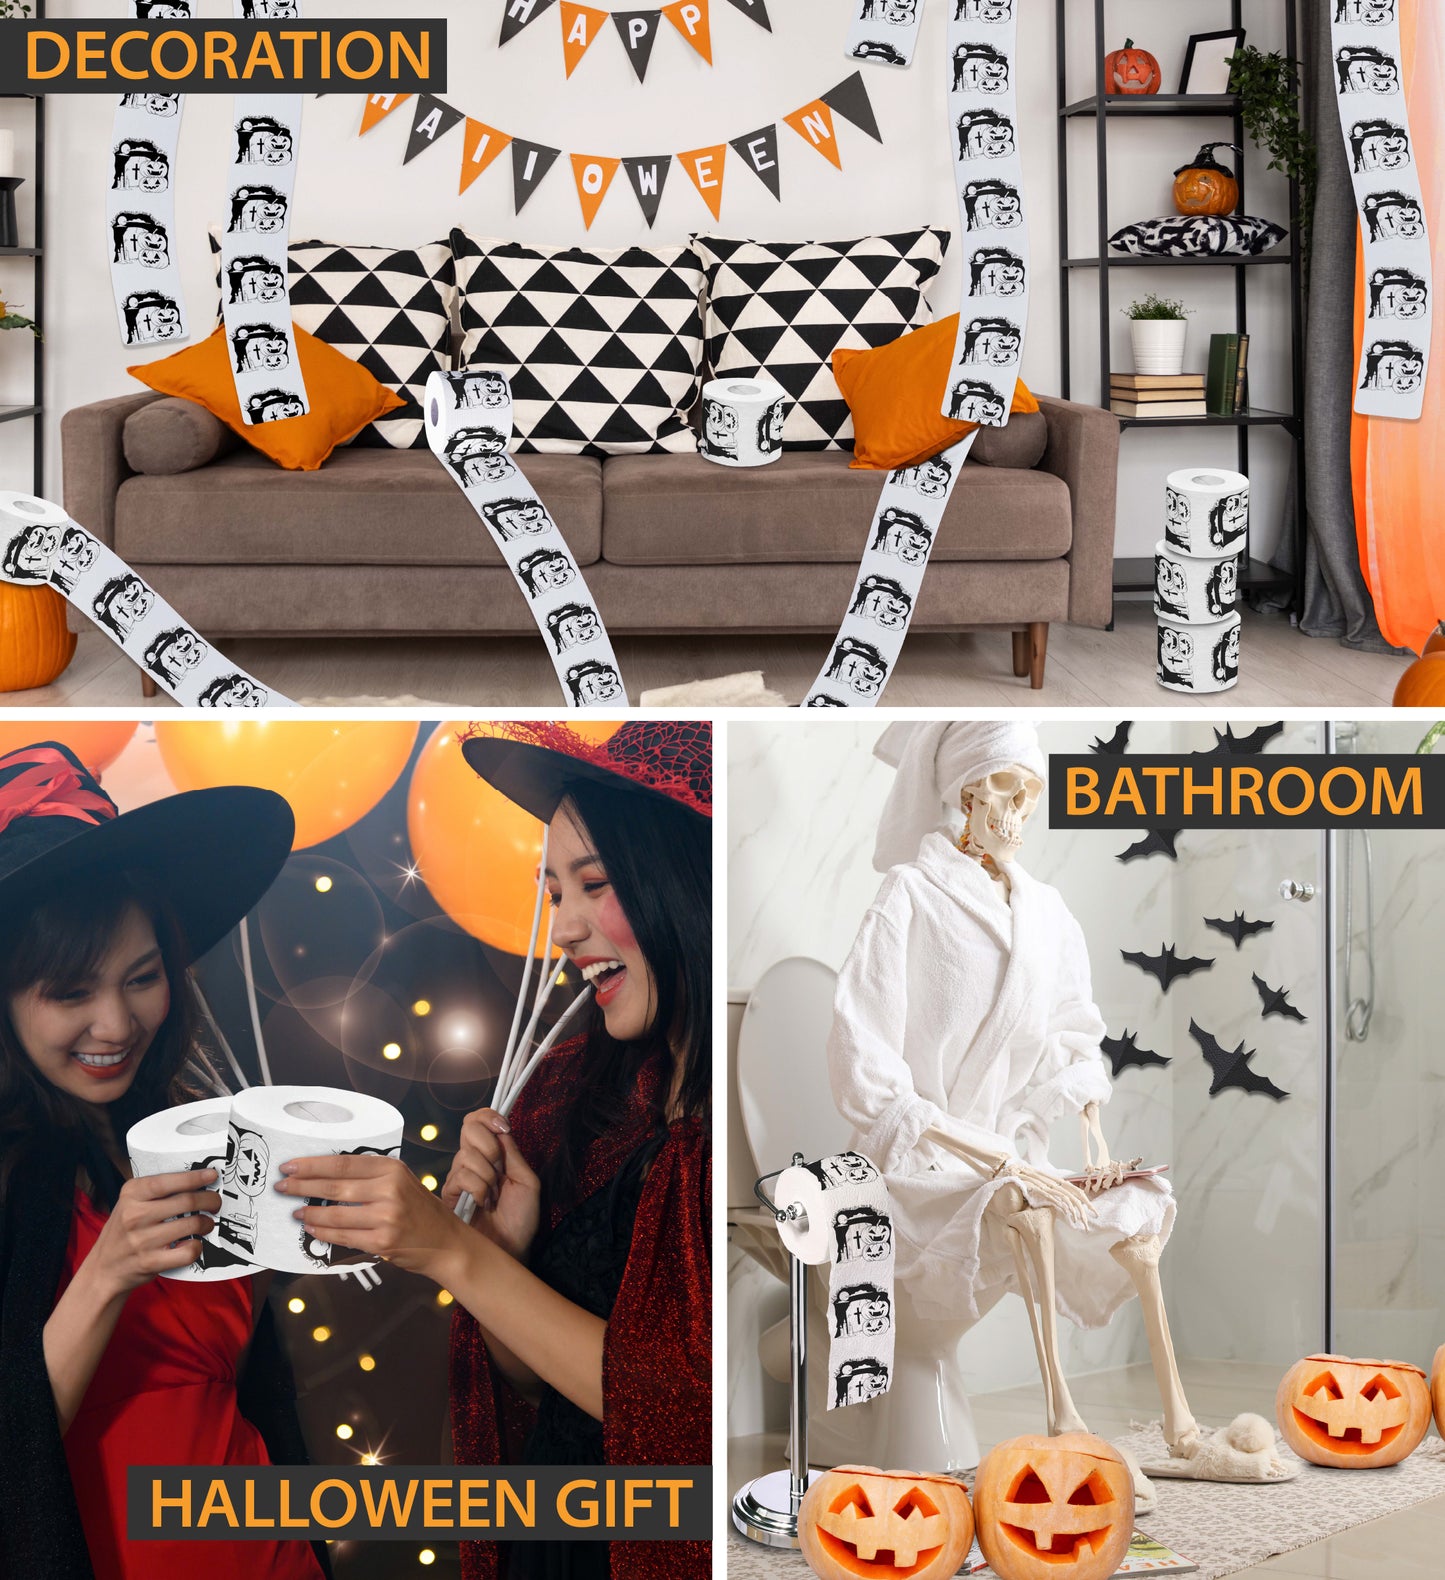 Printed TP Halloween Night Scary Printed Toilet Paper Gag Gift – 500 Sheets